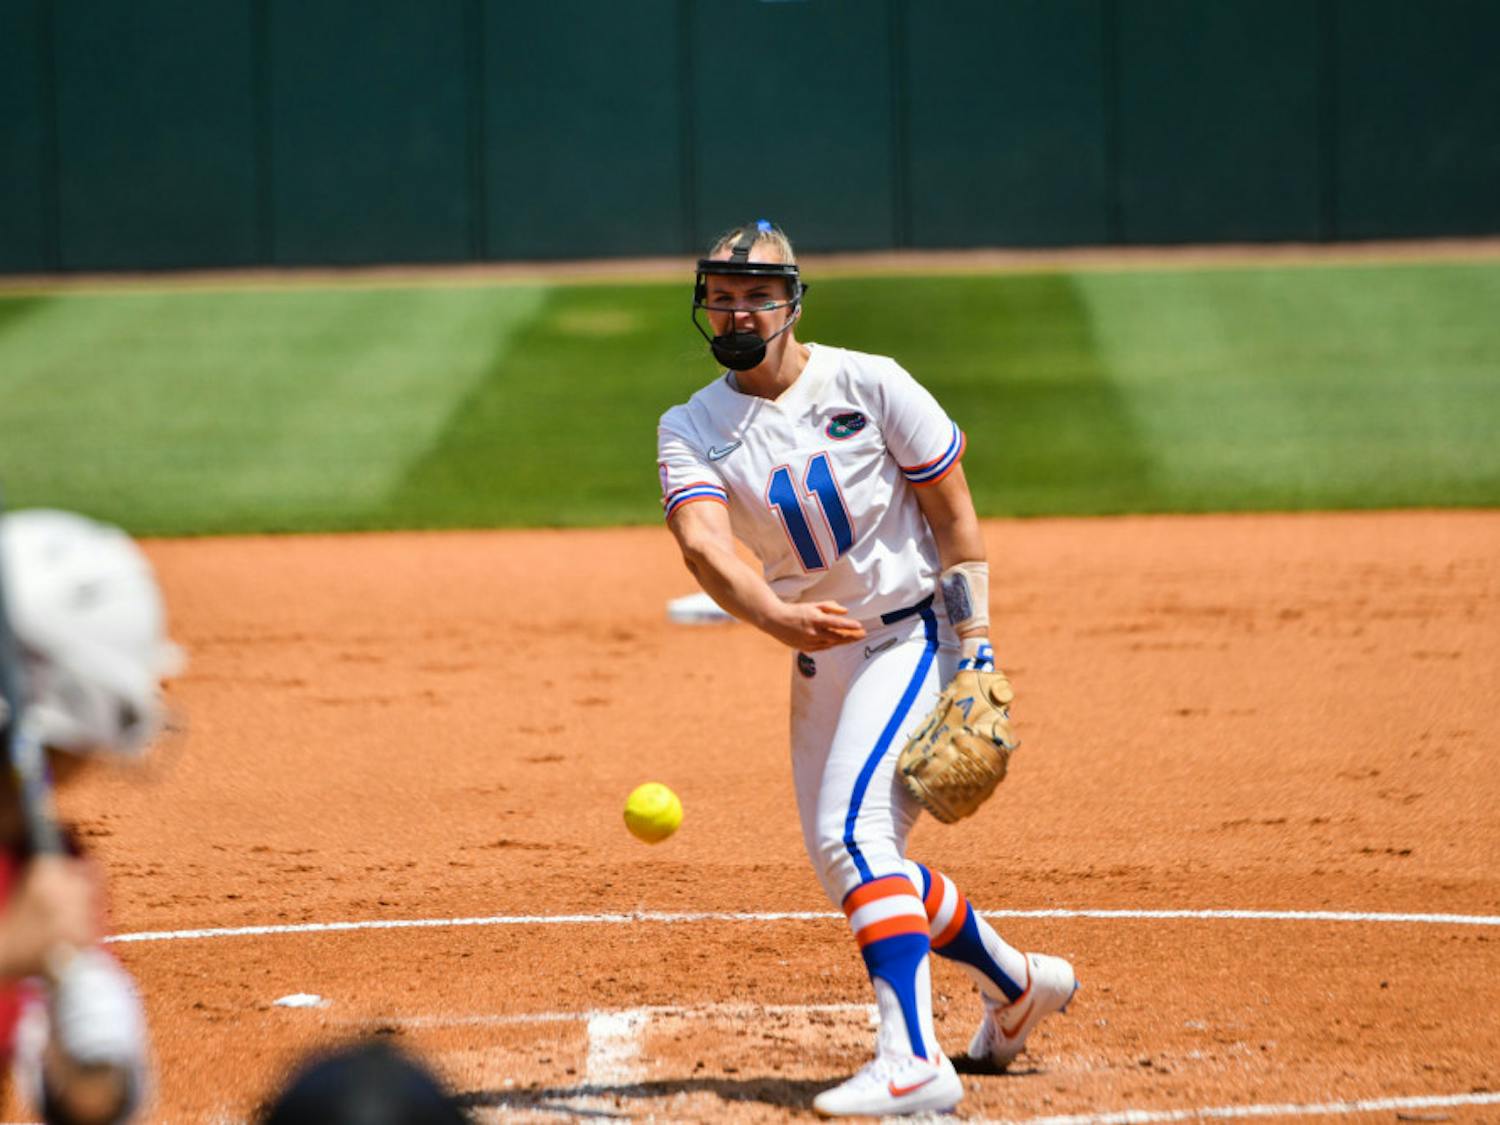 UF senior Kelly Barnhill pitched her second complete game of the weekend against Arkansas on Sunday. She allowed only two hits and one earned run to go along with eight strikeouts.